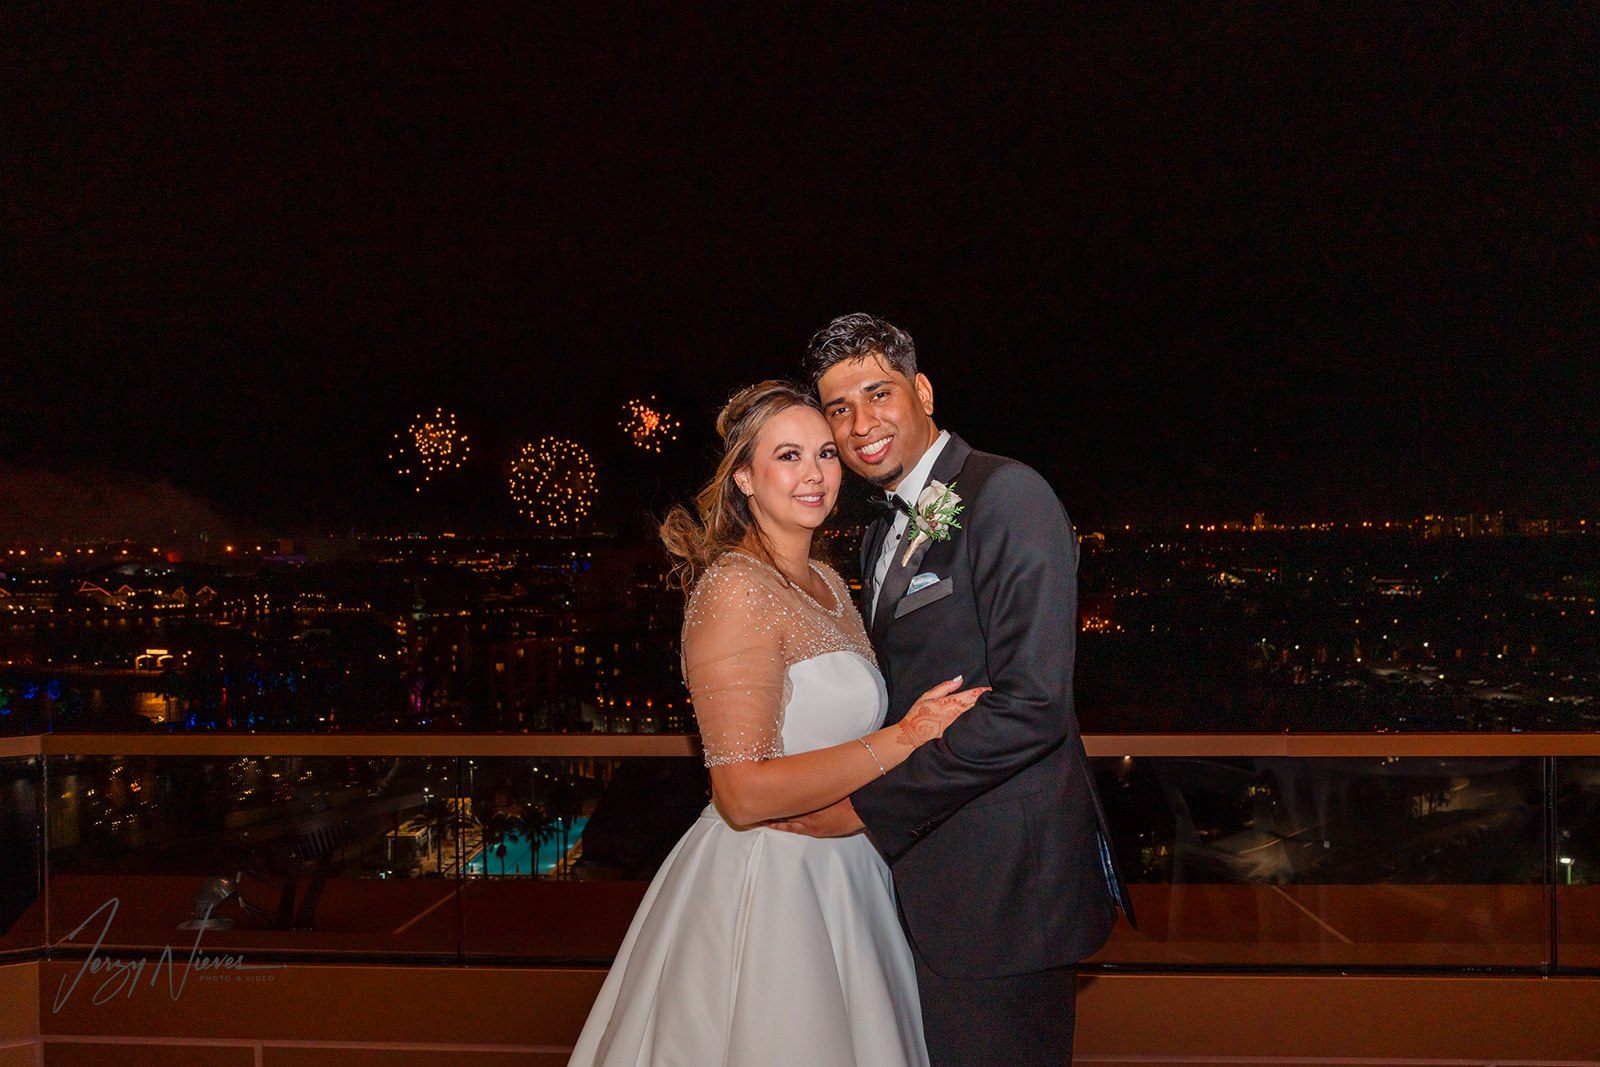 Nicole and Ravin on balcony with Disney fireworks in background at Disney Swan.